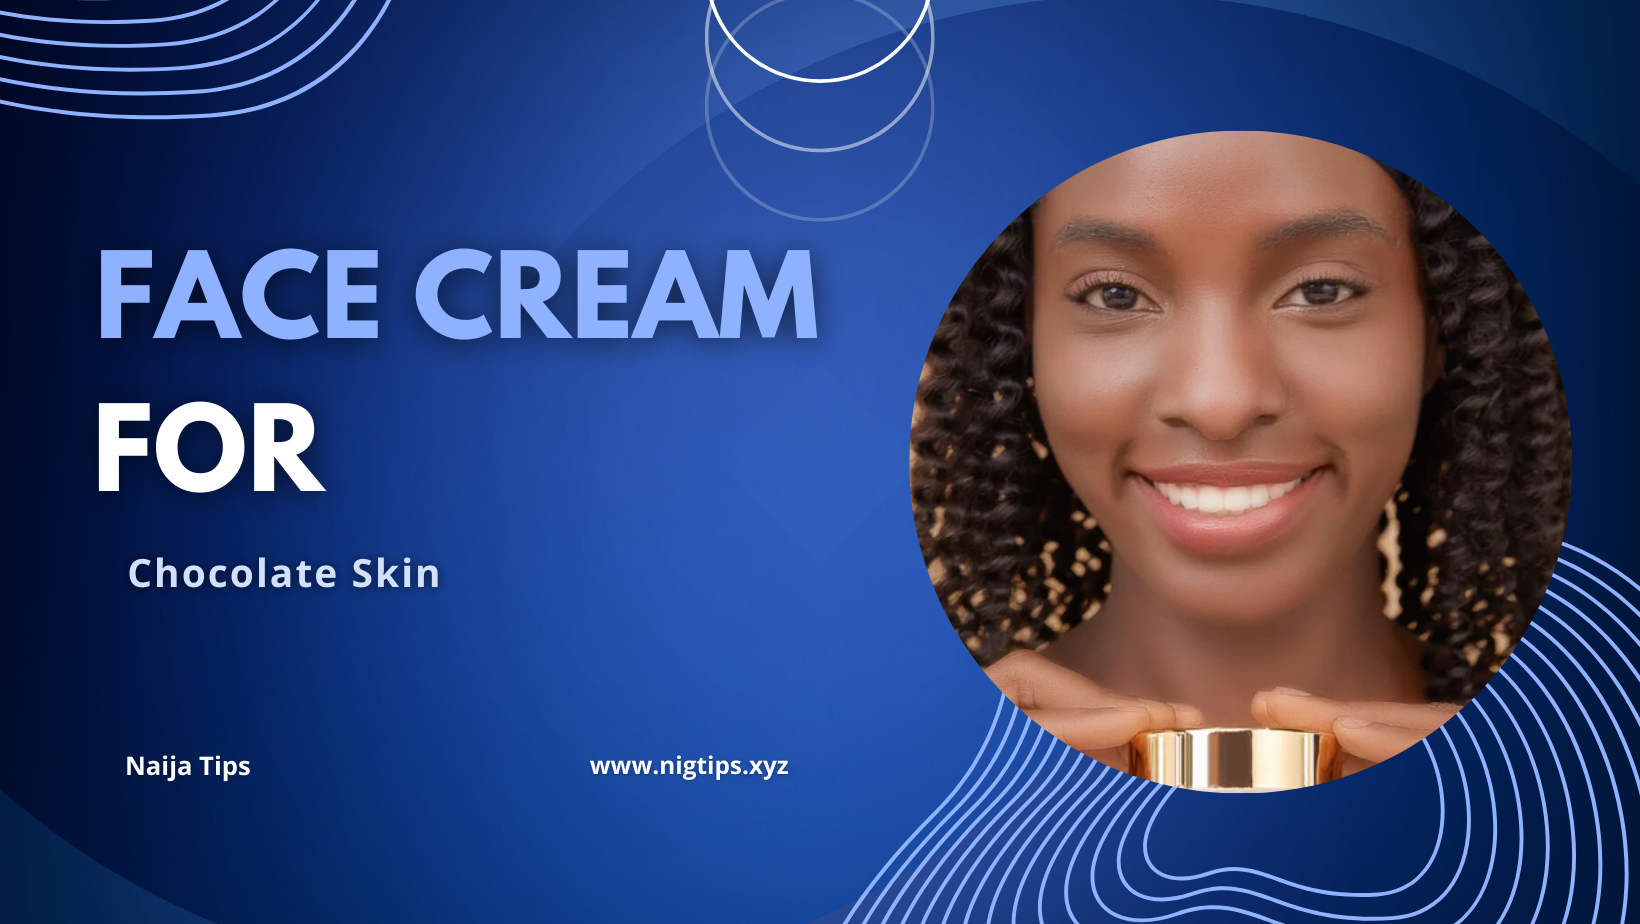 Top 7 Face Cream For Chocolate Skin